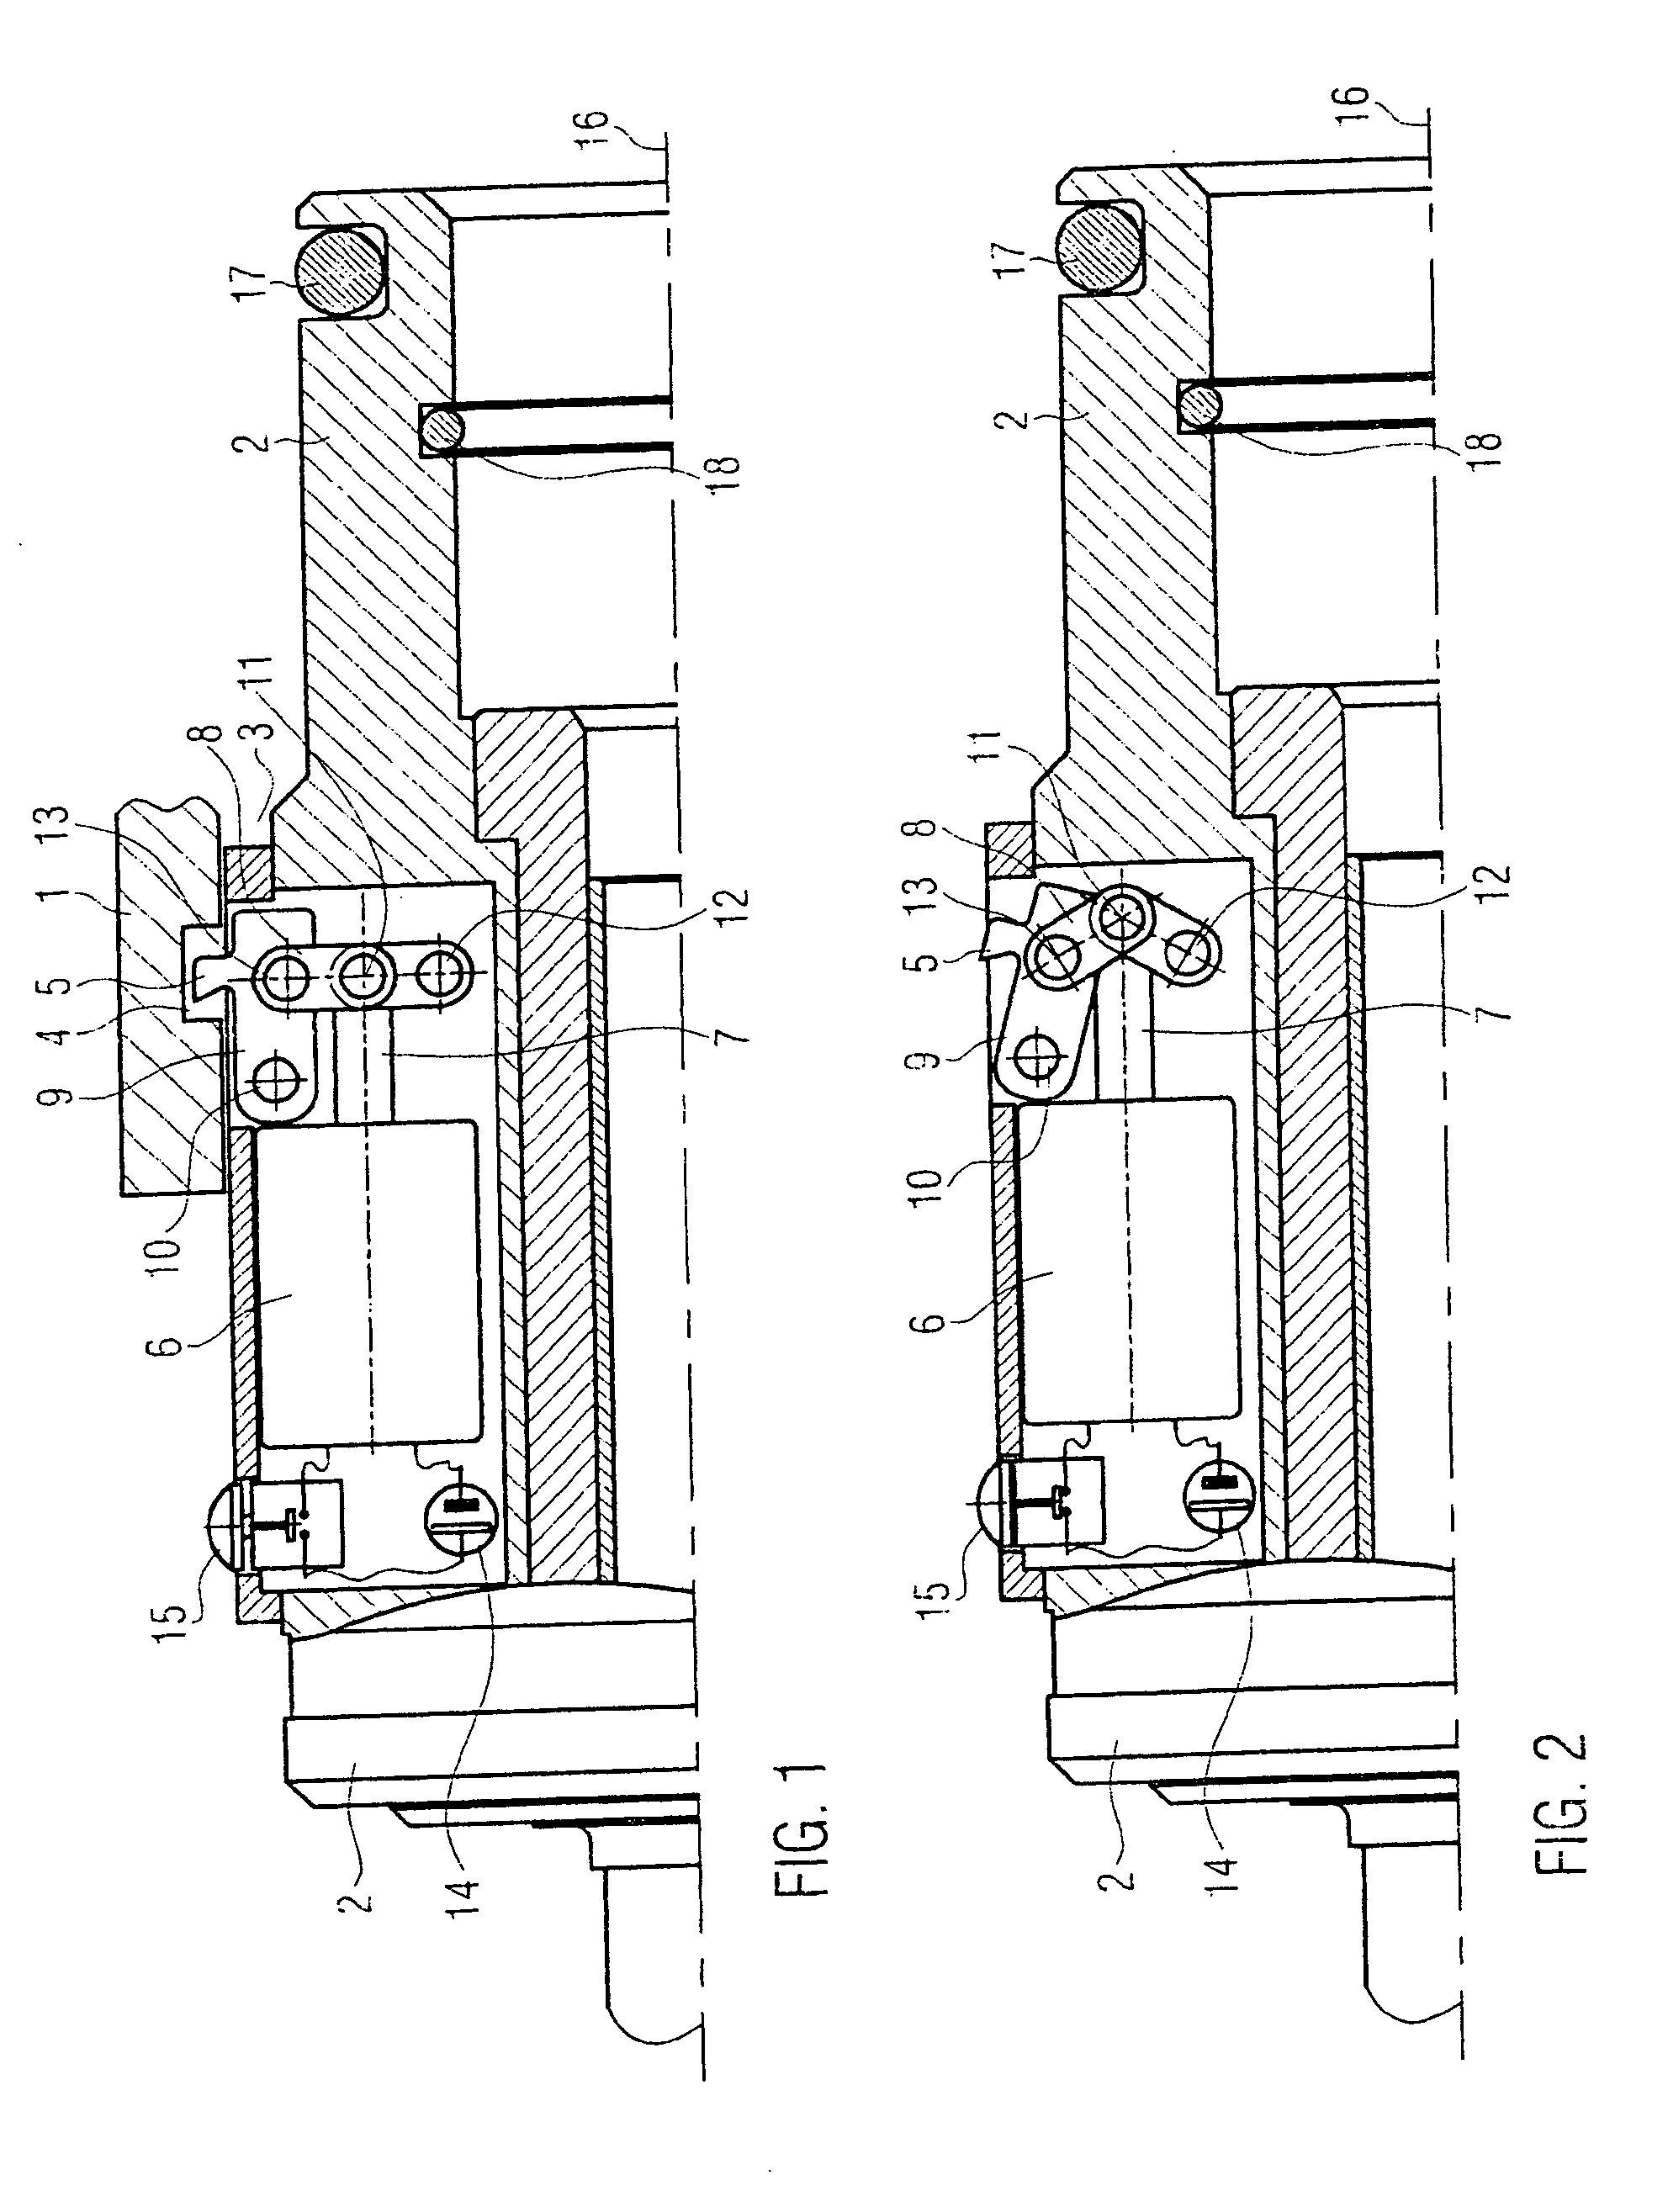 Surgical coupling device